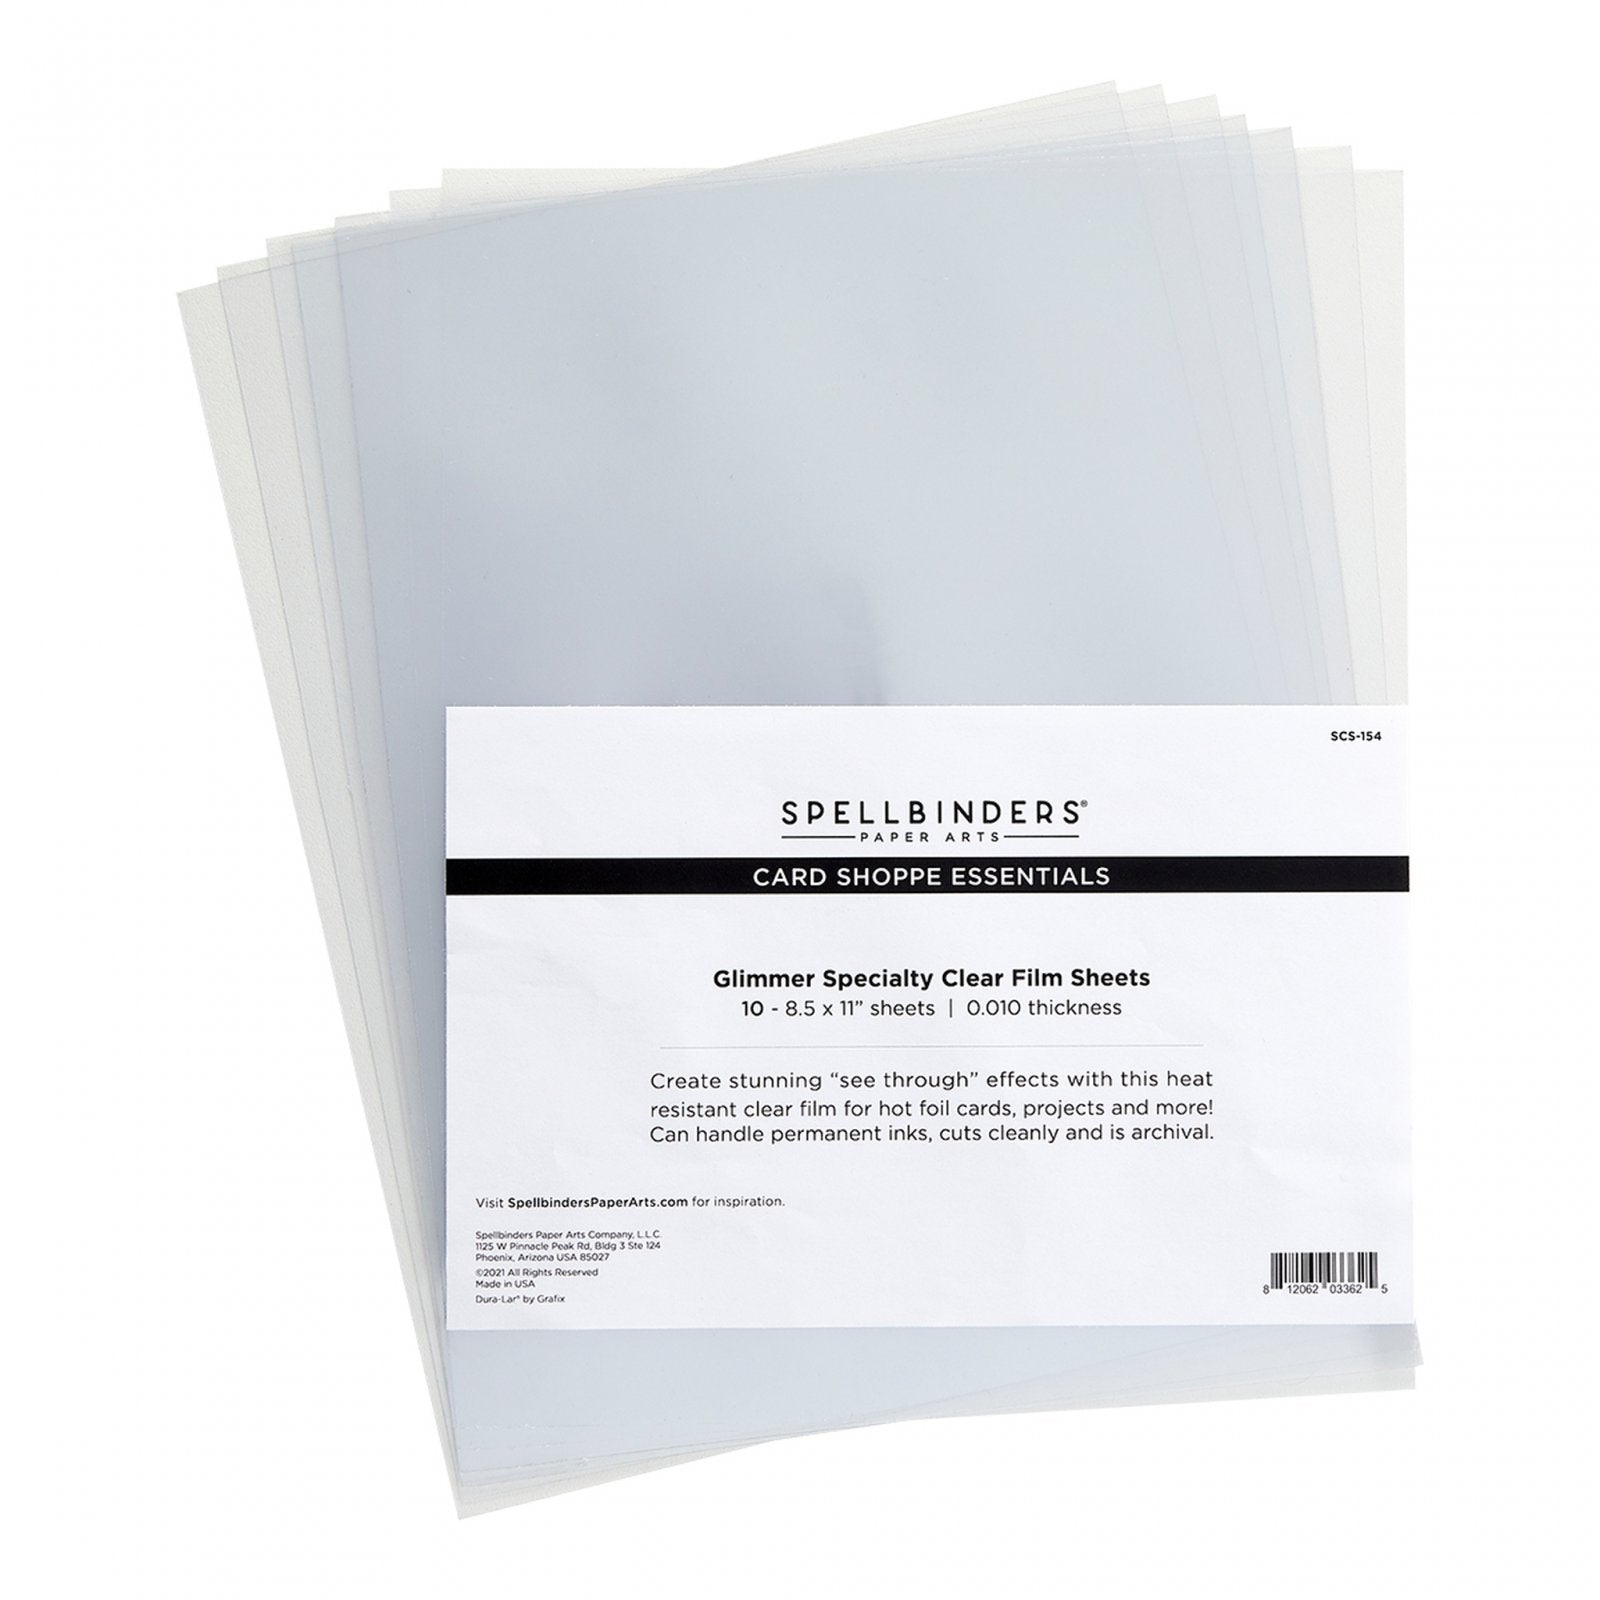 GLIMMER SPECIALTY CLEAR FILM SHEETS 8 1/2" X 11" - 10 PACK